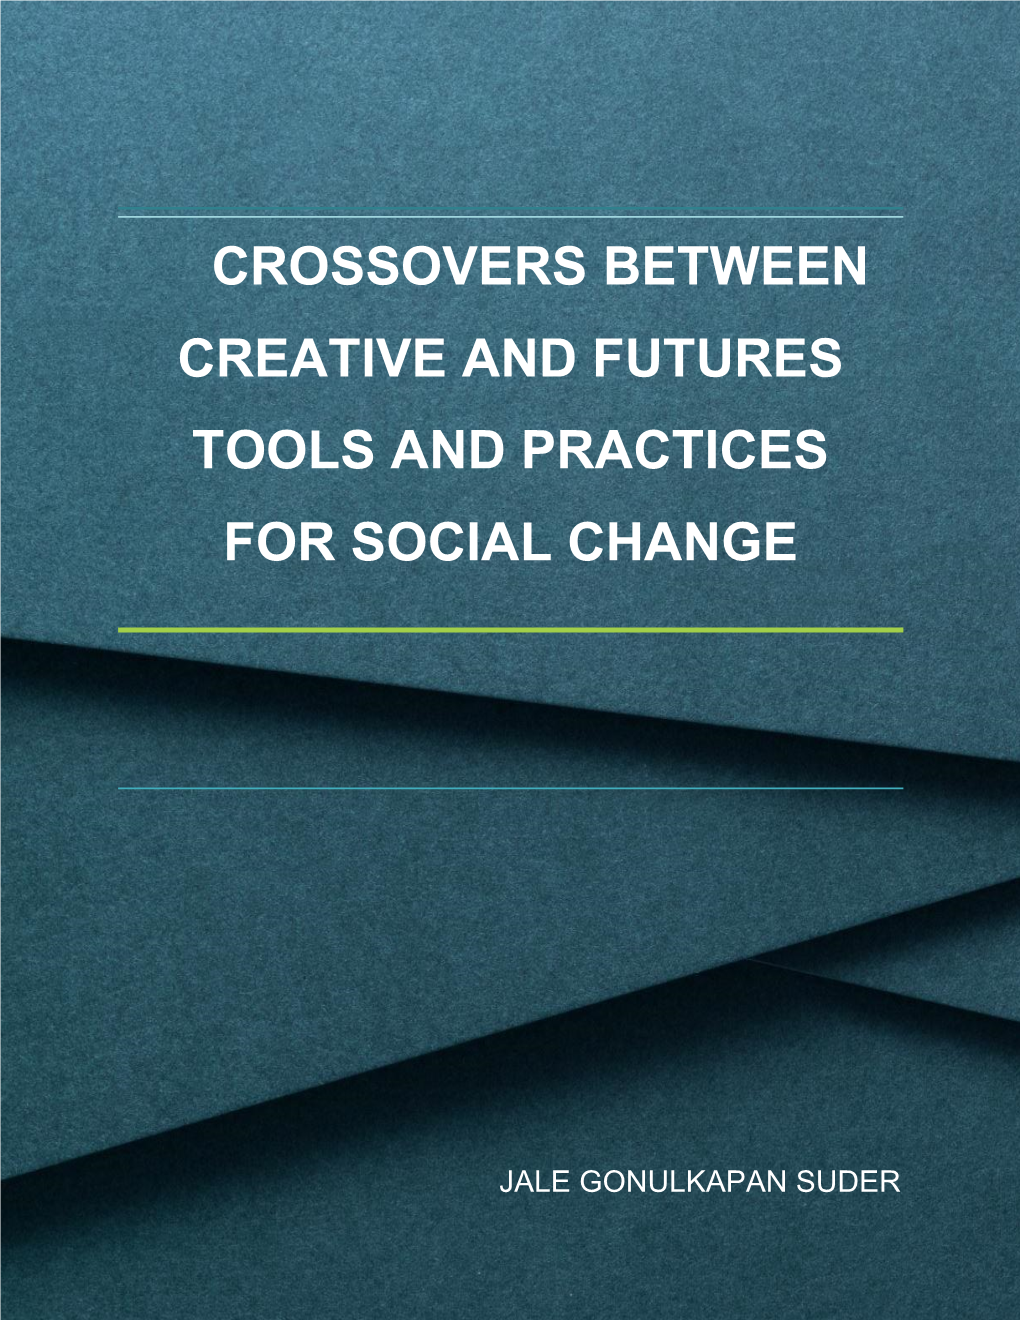 Crossovers Between Creative and Futures Tools and Practices for Social Change